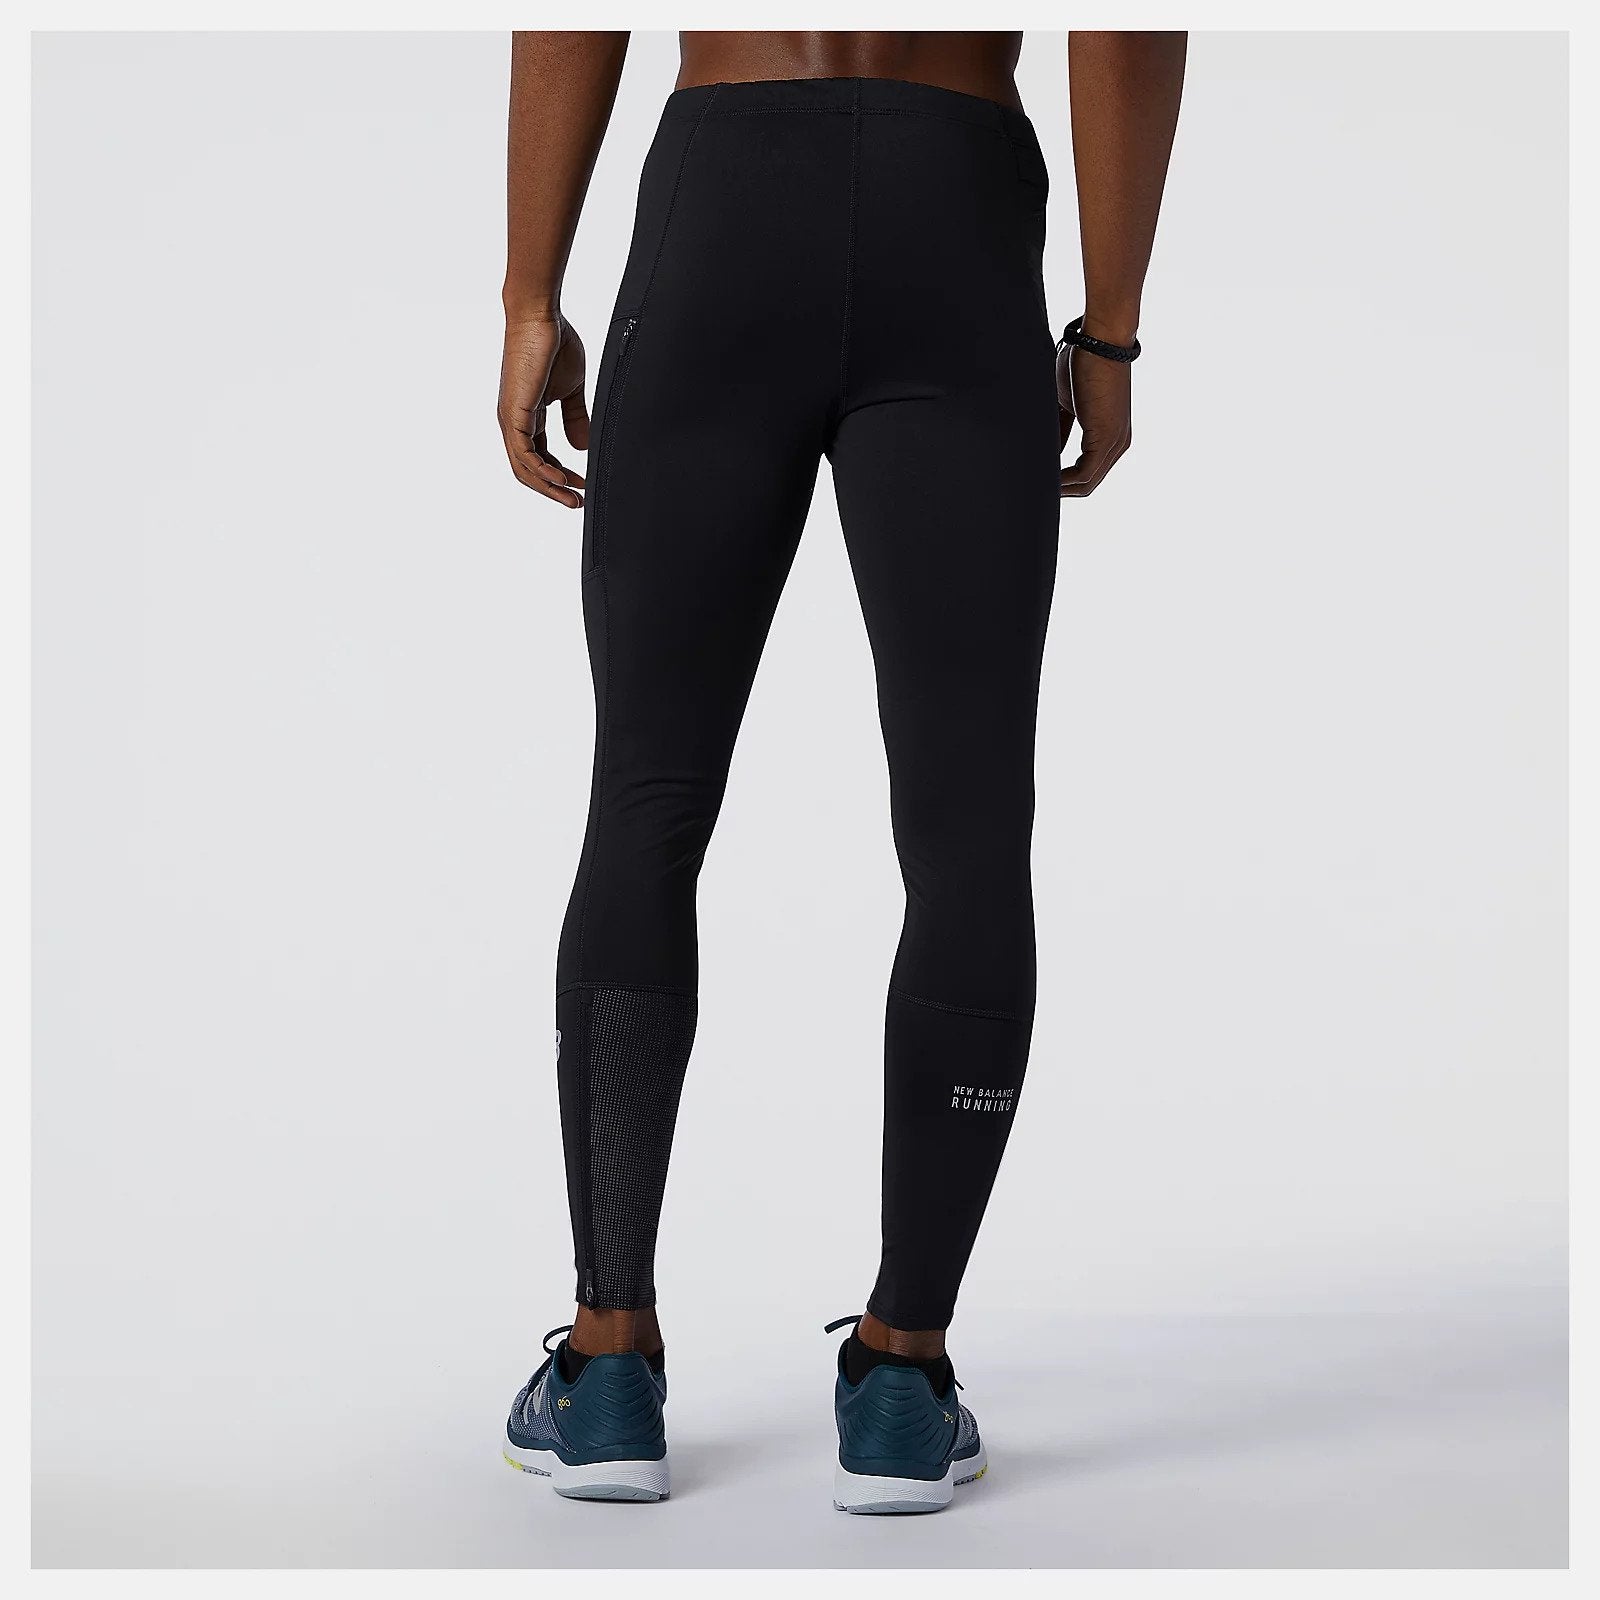 Sports and recreation :: Sports Leggings for Men New Balance Reflective  Accelerate Black